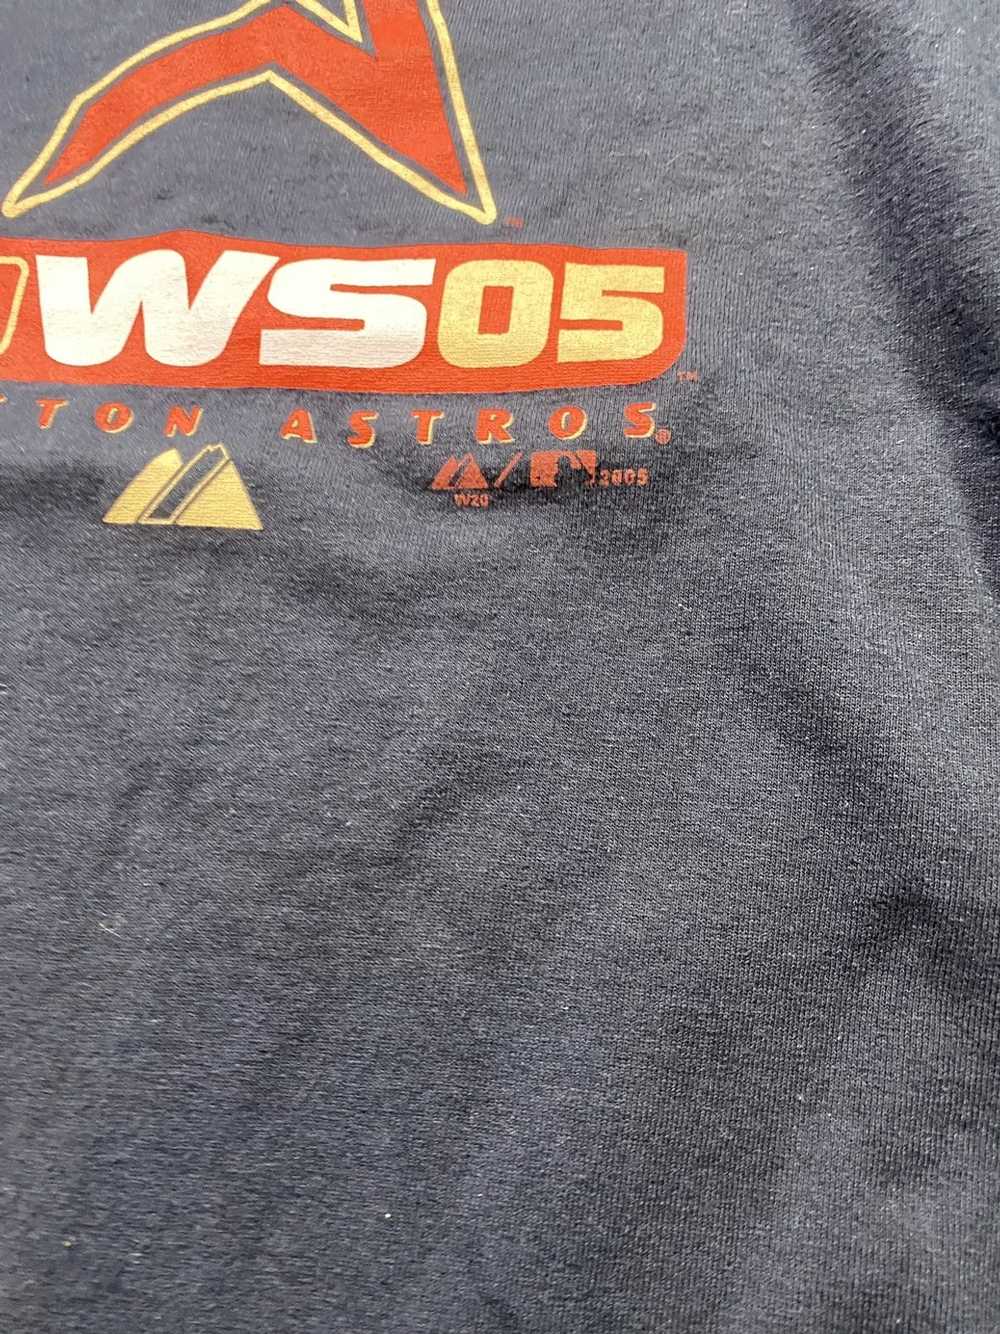 In honor of Championship weekend here's my favorite vintage '94 Astros tee  in the collection! Nothing beats the gold star logo in my opinion ⚾️💫 : r/ Astros